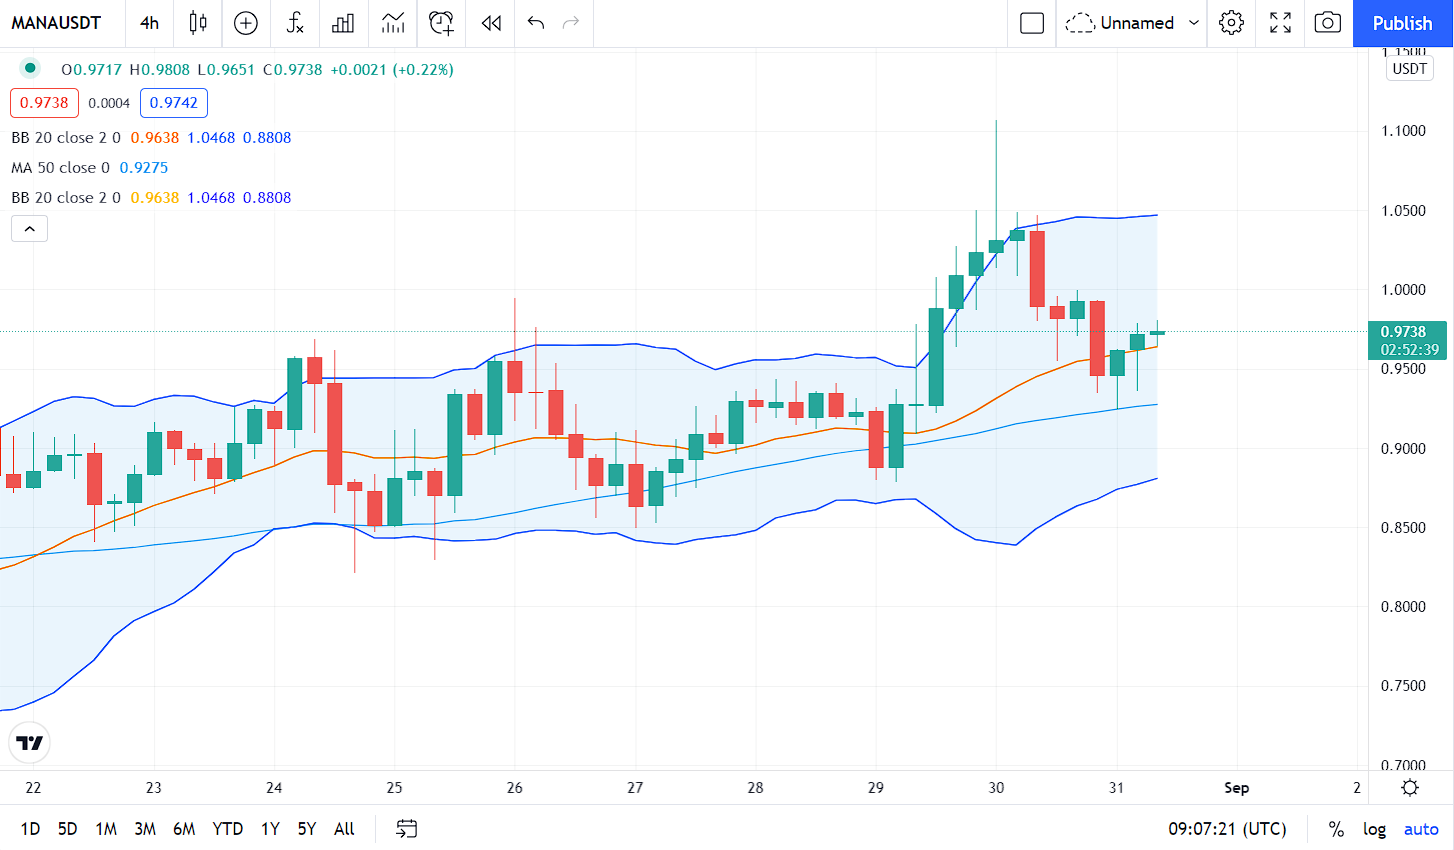 Decentraland Price Prediction technical analysis for 2021 on charts by Tradingview